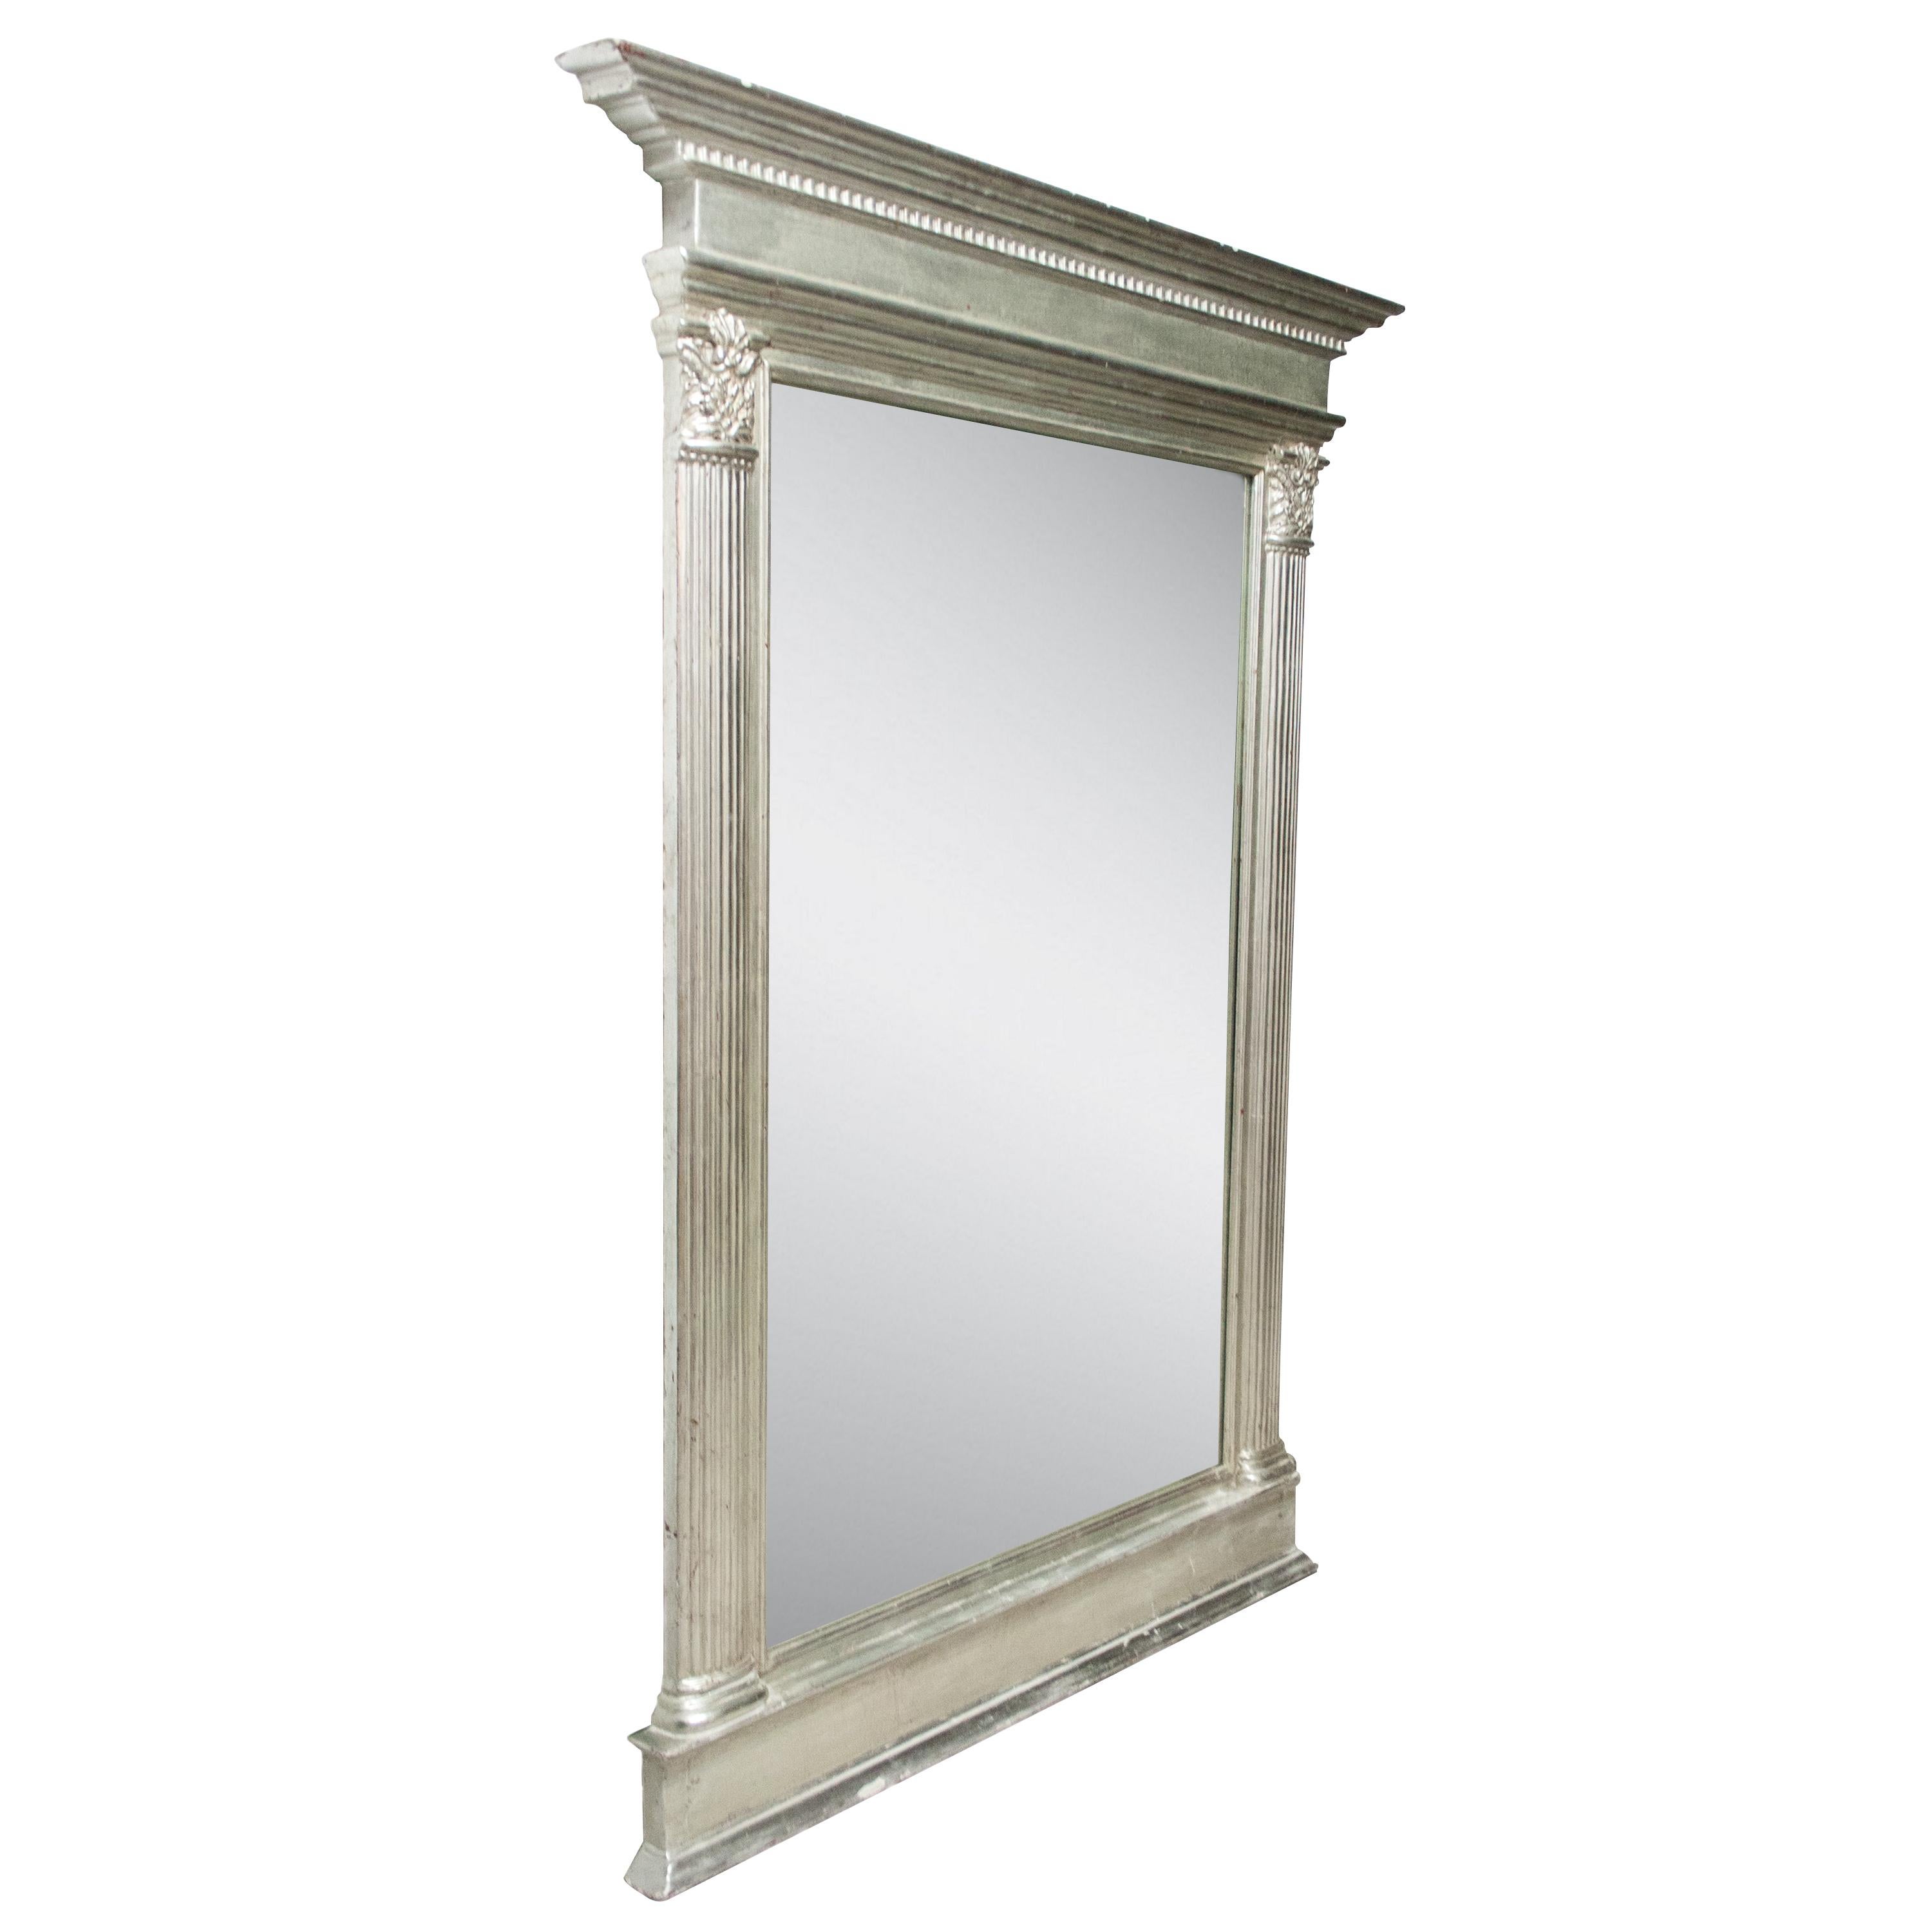 Neoclassical Regency style handcrafted mirror. Rectangular hand carved wooden structure with silver foiled finish. Spain, 1970.